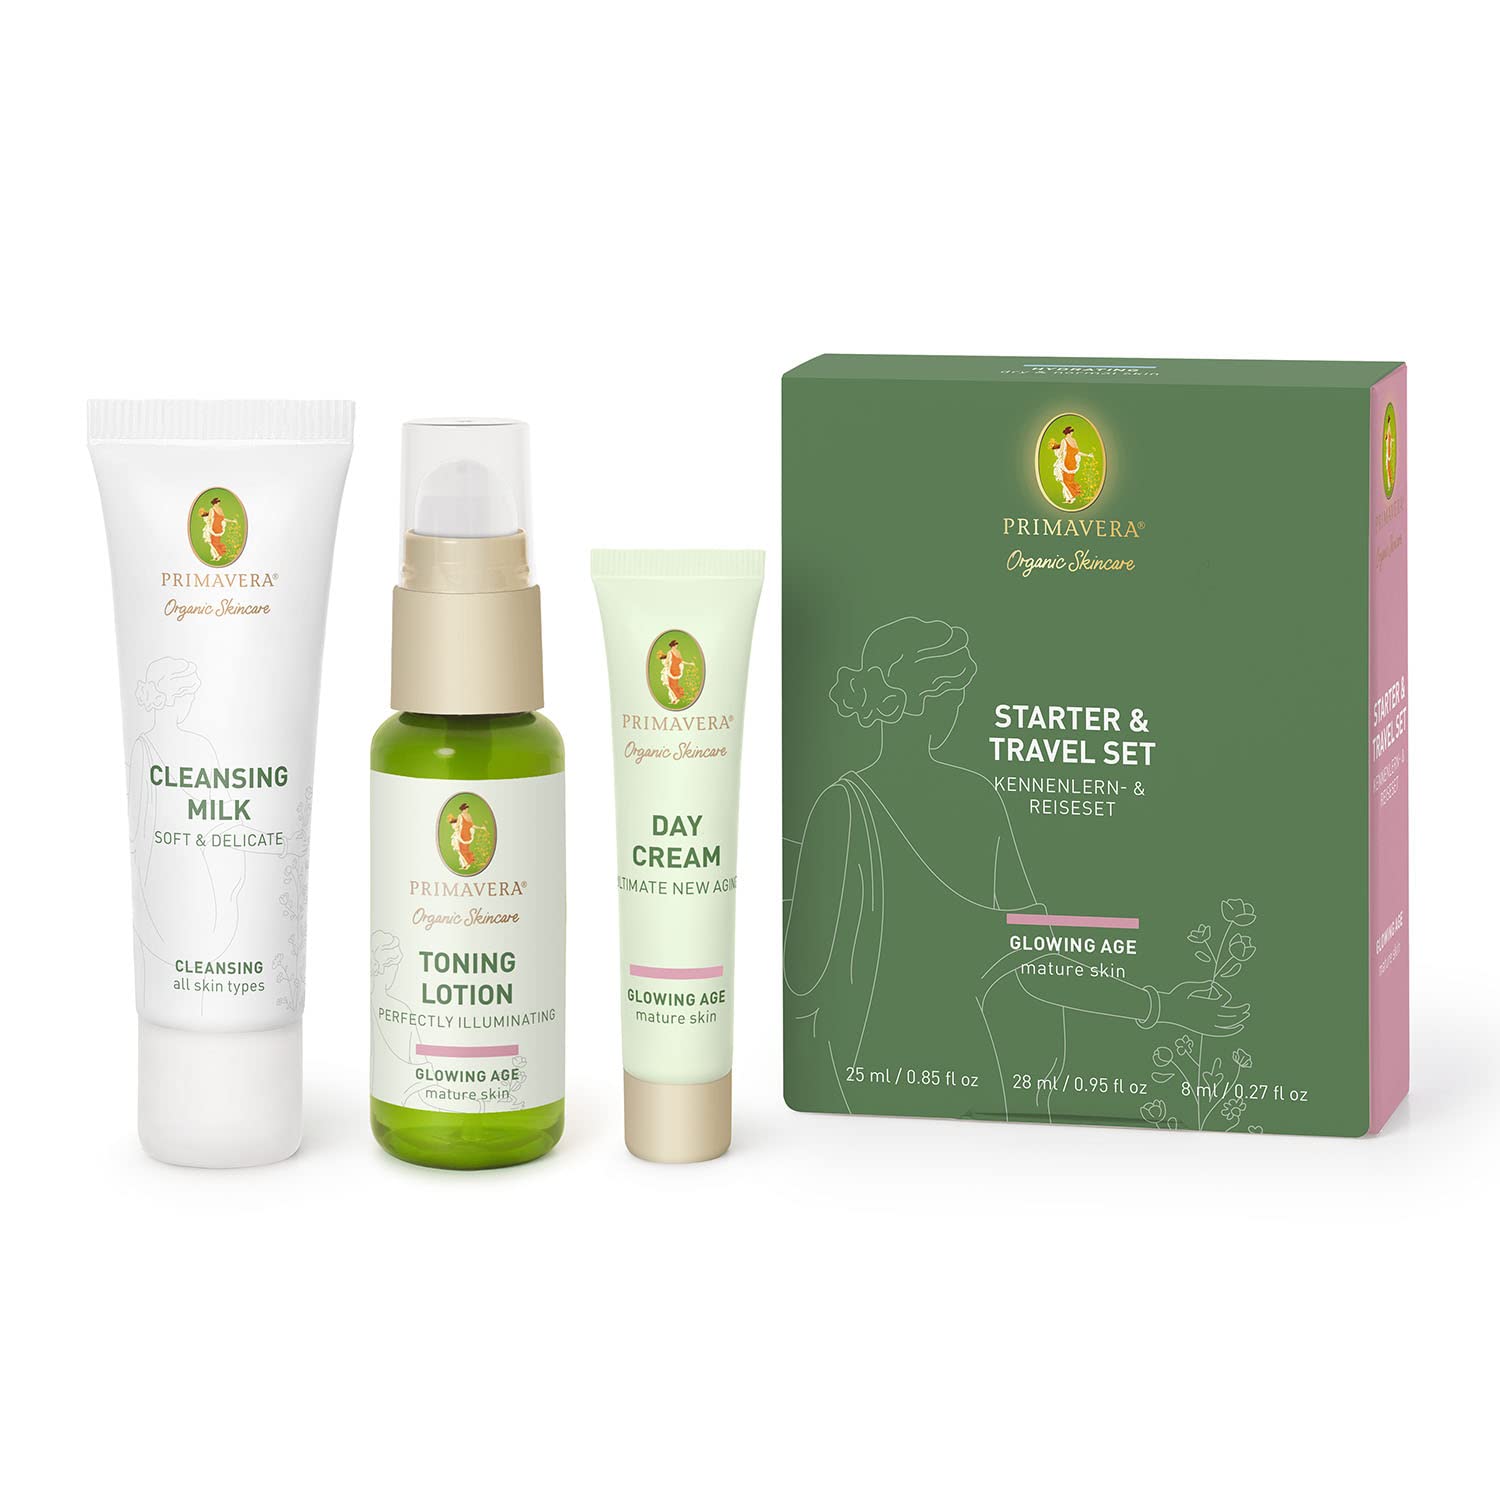 PRIMAVERA Starter & Travel Set Glowing Age - Natural Cosmetics - Learning to know & Travel Set for mature, demanding skin - Gift Box Cleaning, Toner, Care - Vegan